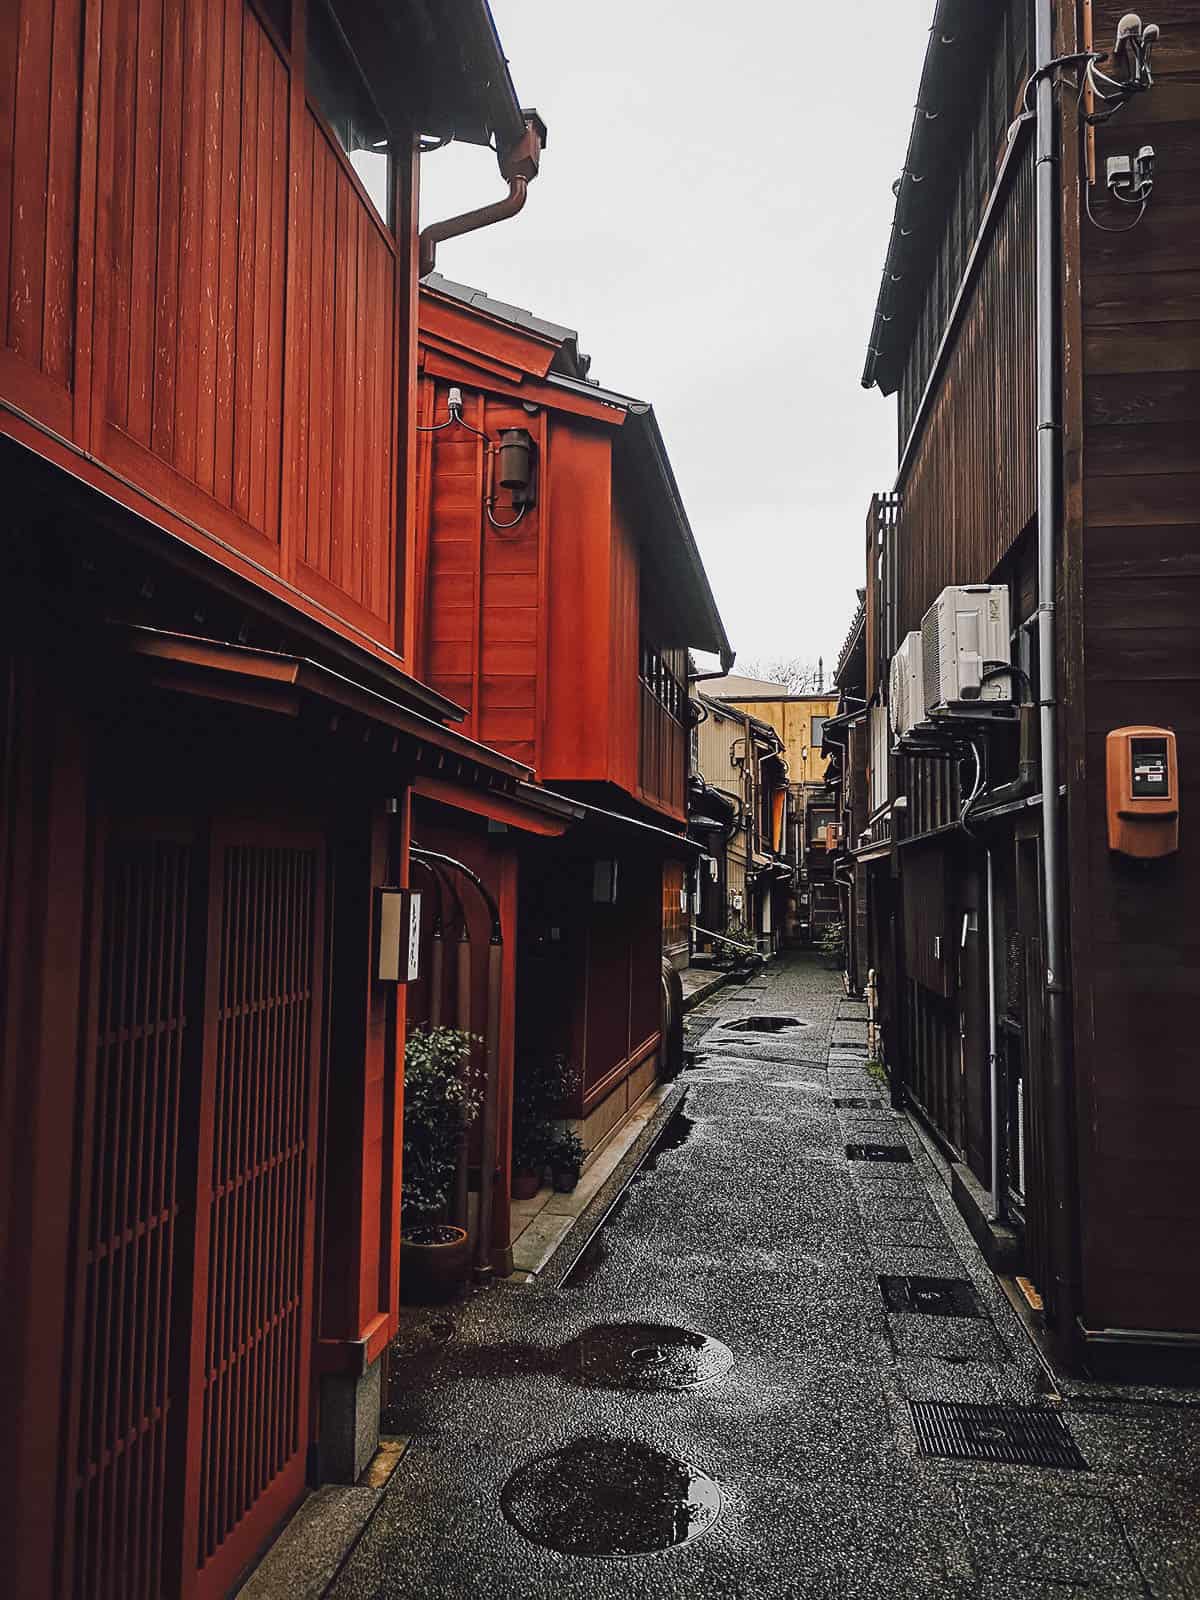 Alleyway in Kazuemachi chayagai, one of the most famous geisha districts in Ishikawa prefecture